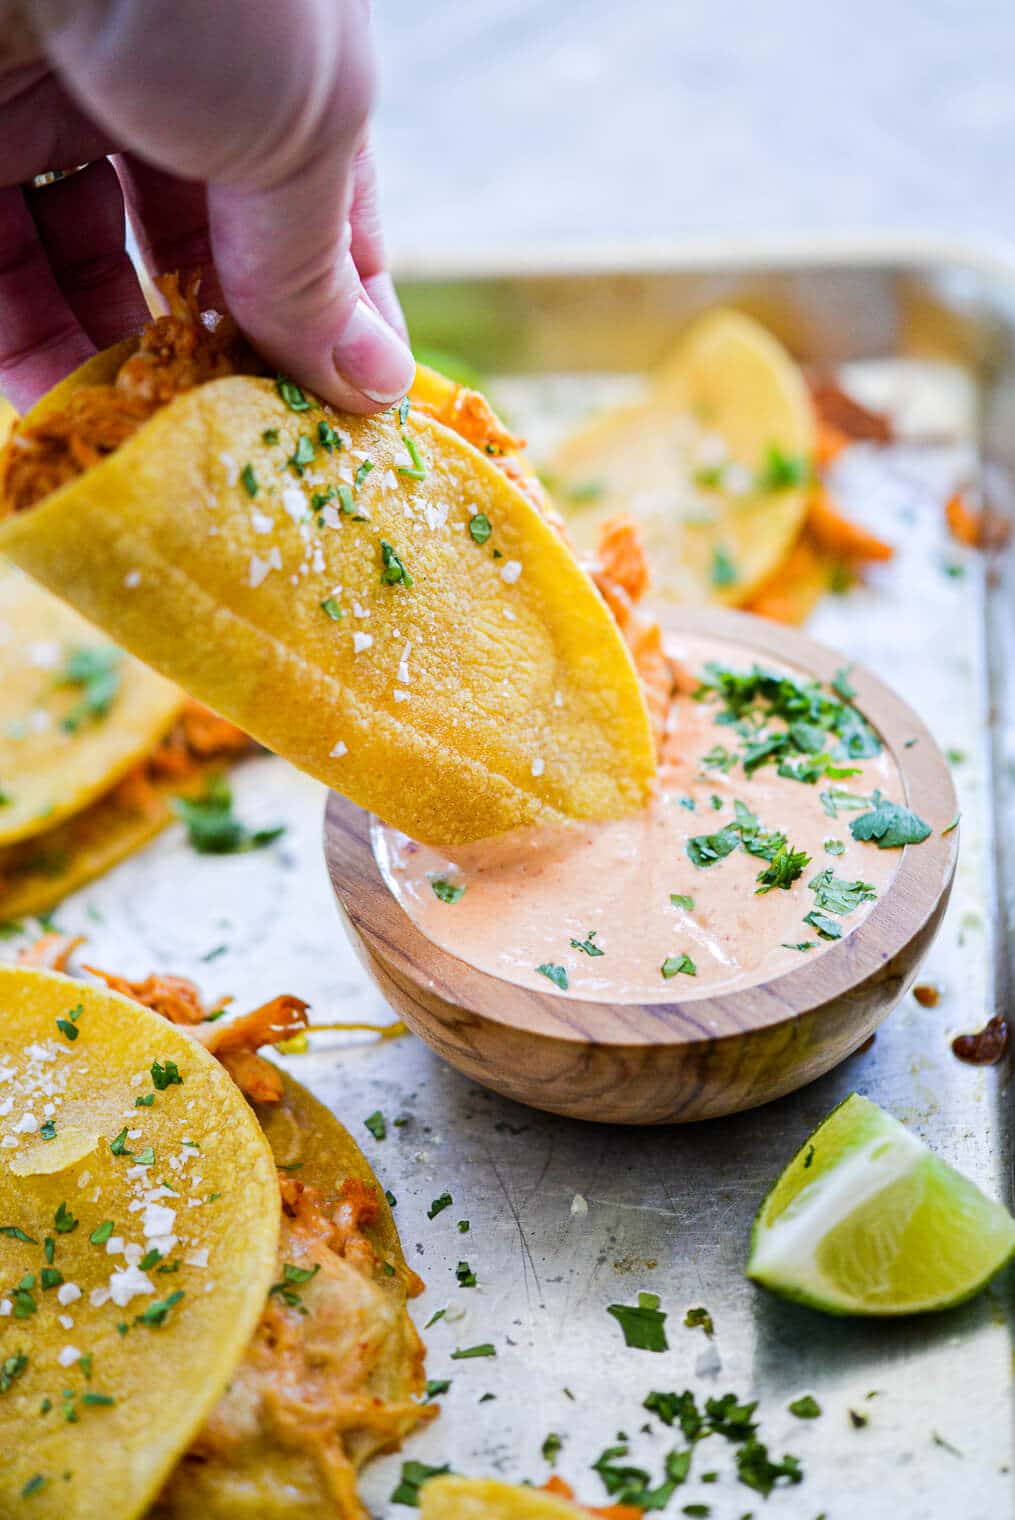 Hand holding shredded chicken taco and dipping it into creamy dipping sauce.